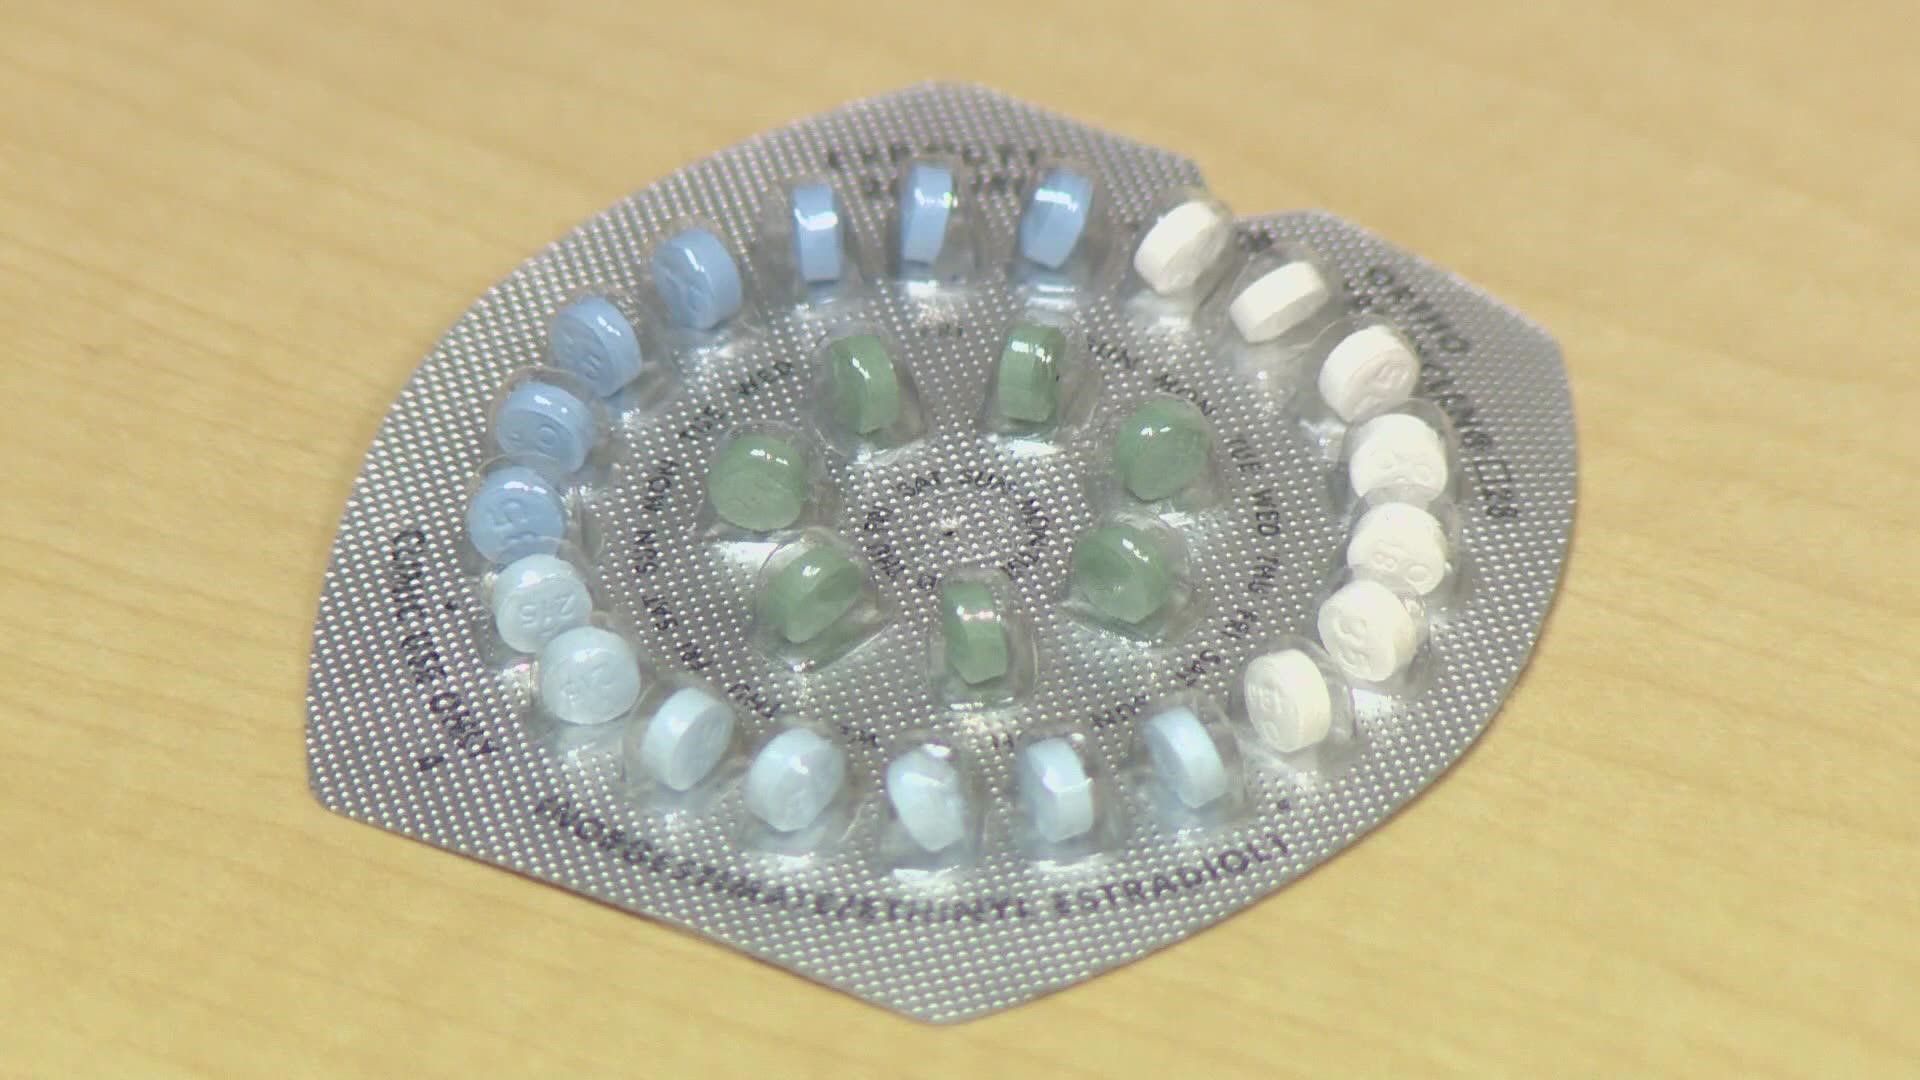 If passed, the Right to Contraceptive Act would ensure access to birth control, while also ensuring healthcare providers can prescribe birth control.